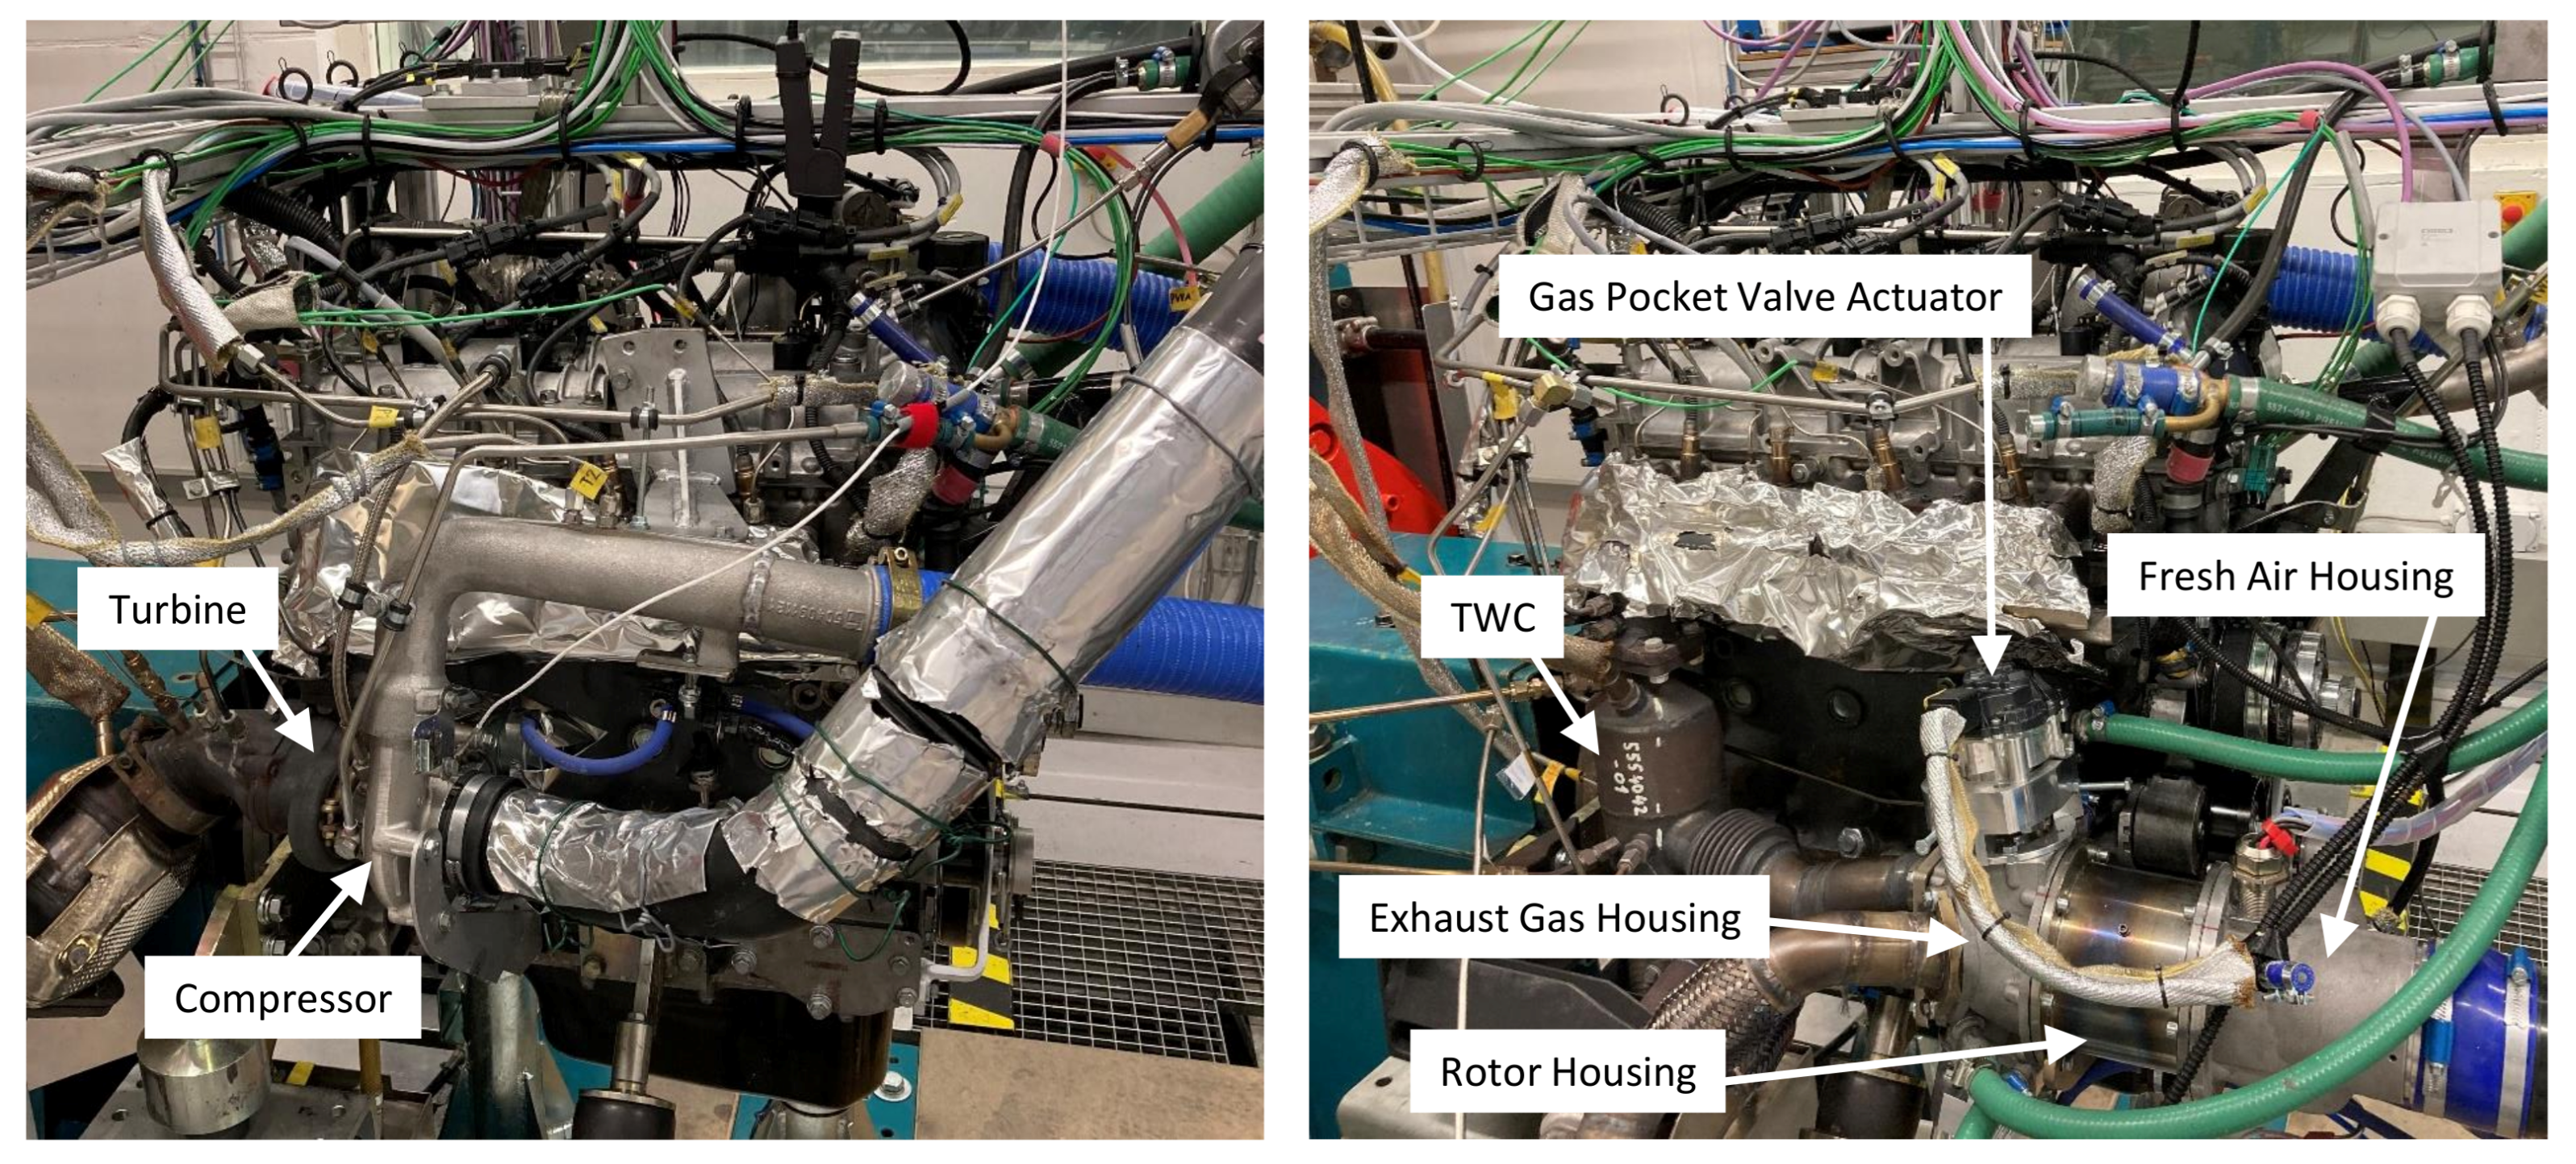 Energies | Free Full-Text | Comparison of Turbocharging and Pressure Wave  Supercharging of a Natural Gas Engine for Light Commercial Trucks and Vans